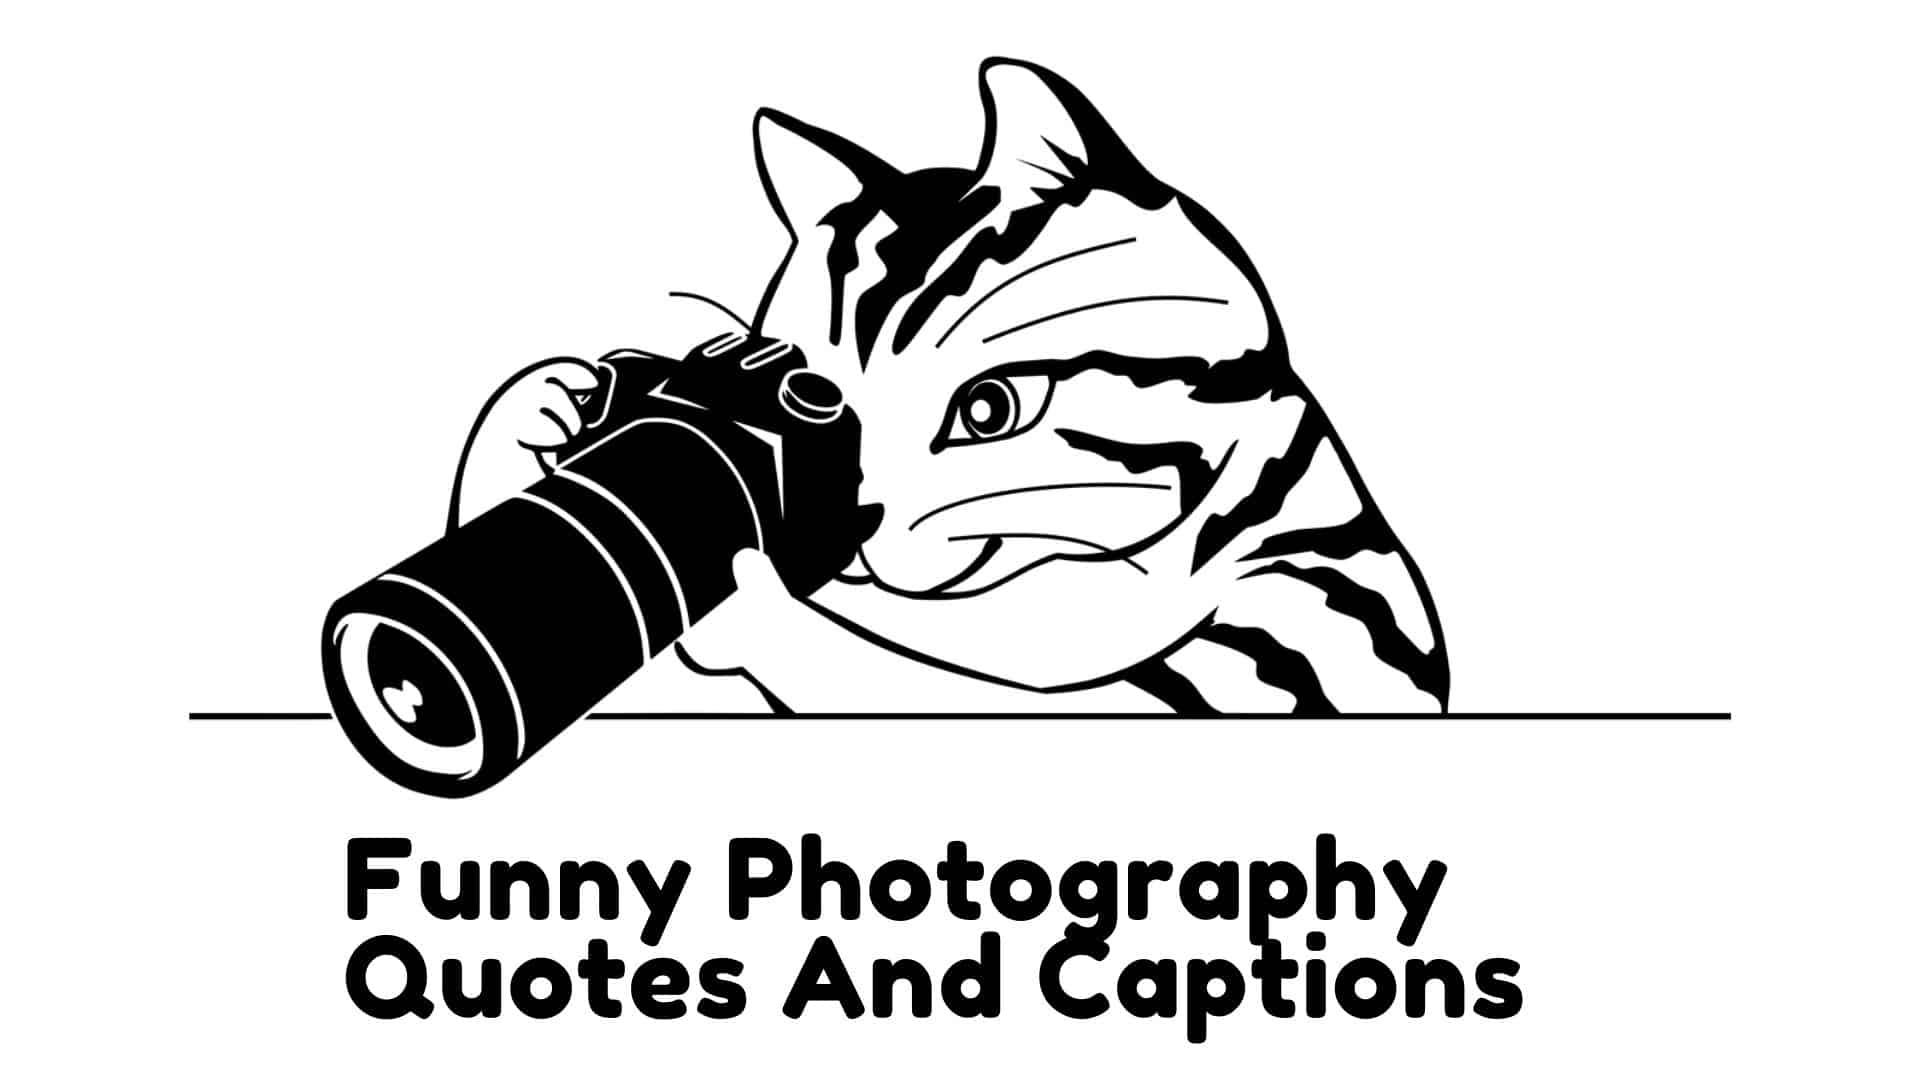 Best Funny Photography Quotes And Captions, Photography Quotes Funny, Funny Photography Jokes, Funny Photography Quotes For Instagram, Funny Quotes About Photography, Funny Short Photography Quotes, Funny Photography Quotes And Captions For Instagram, Funny Quotes on Photography, Photography Funny Quotes, Funny One Liners About Photography, Funny Photography Captions.